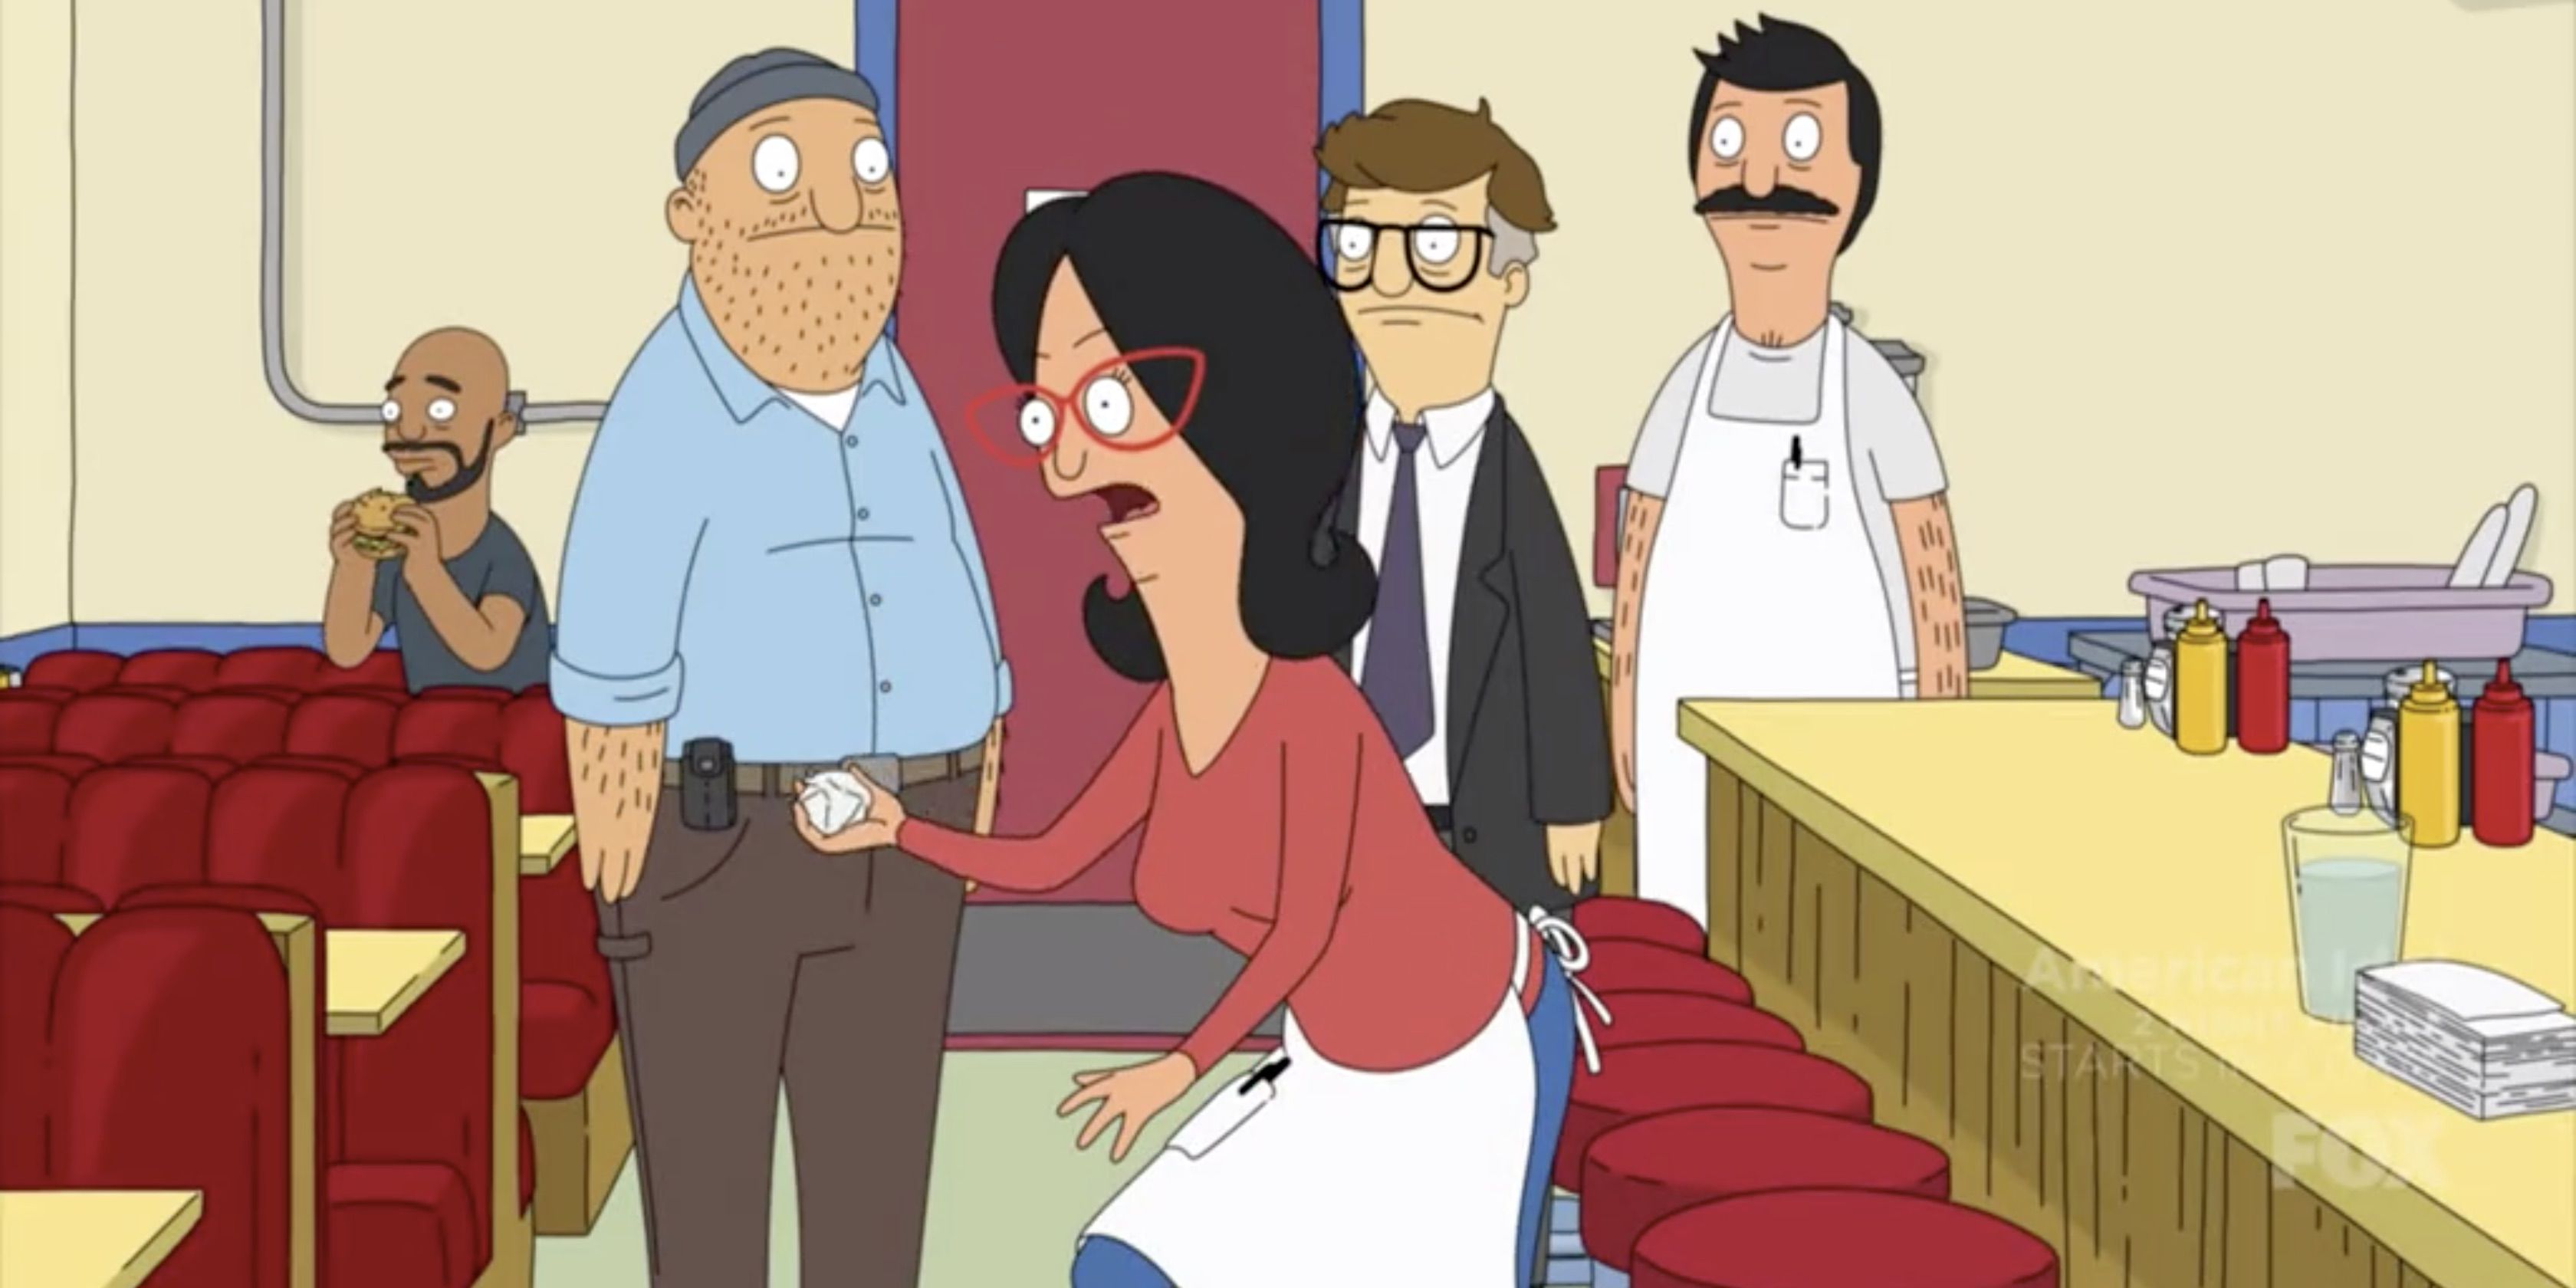 10 Best Sub Plots In Bobs Burgers Ranked 